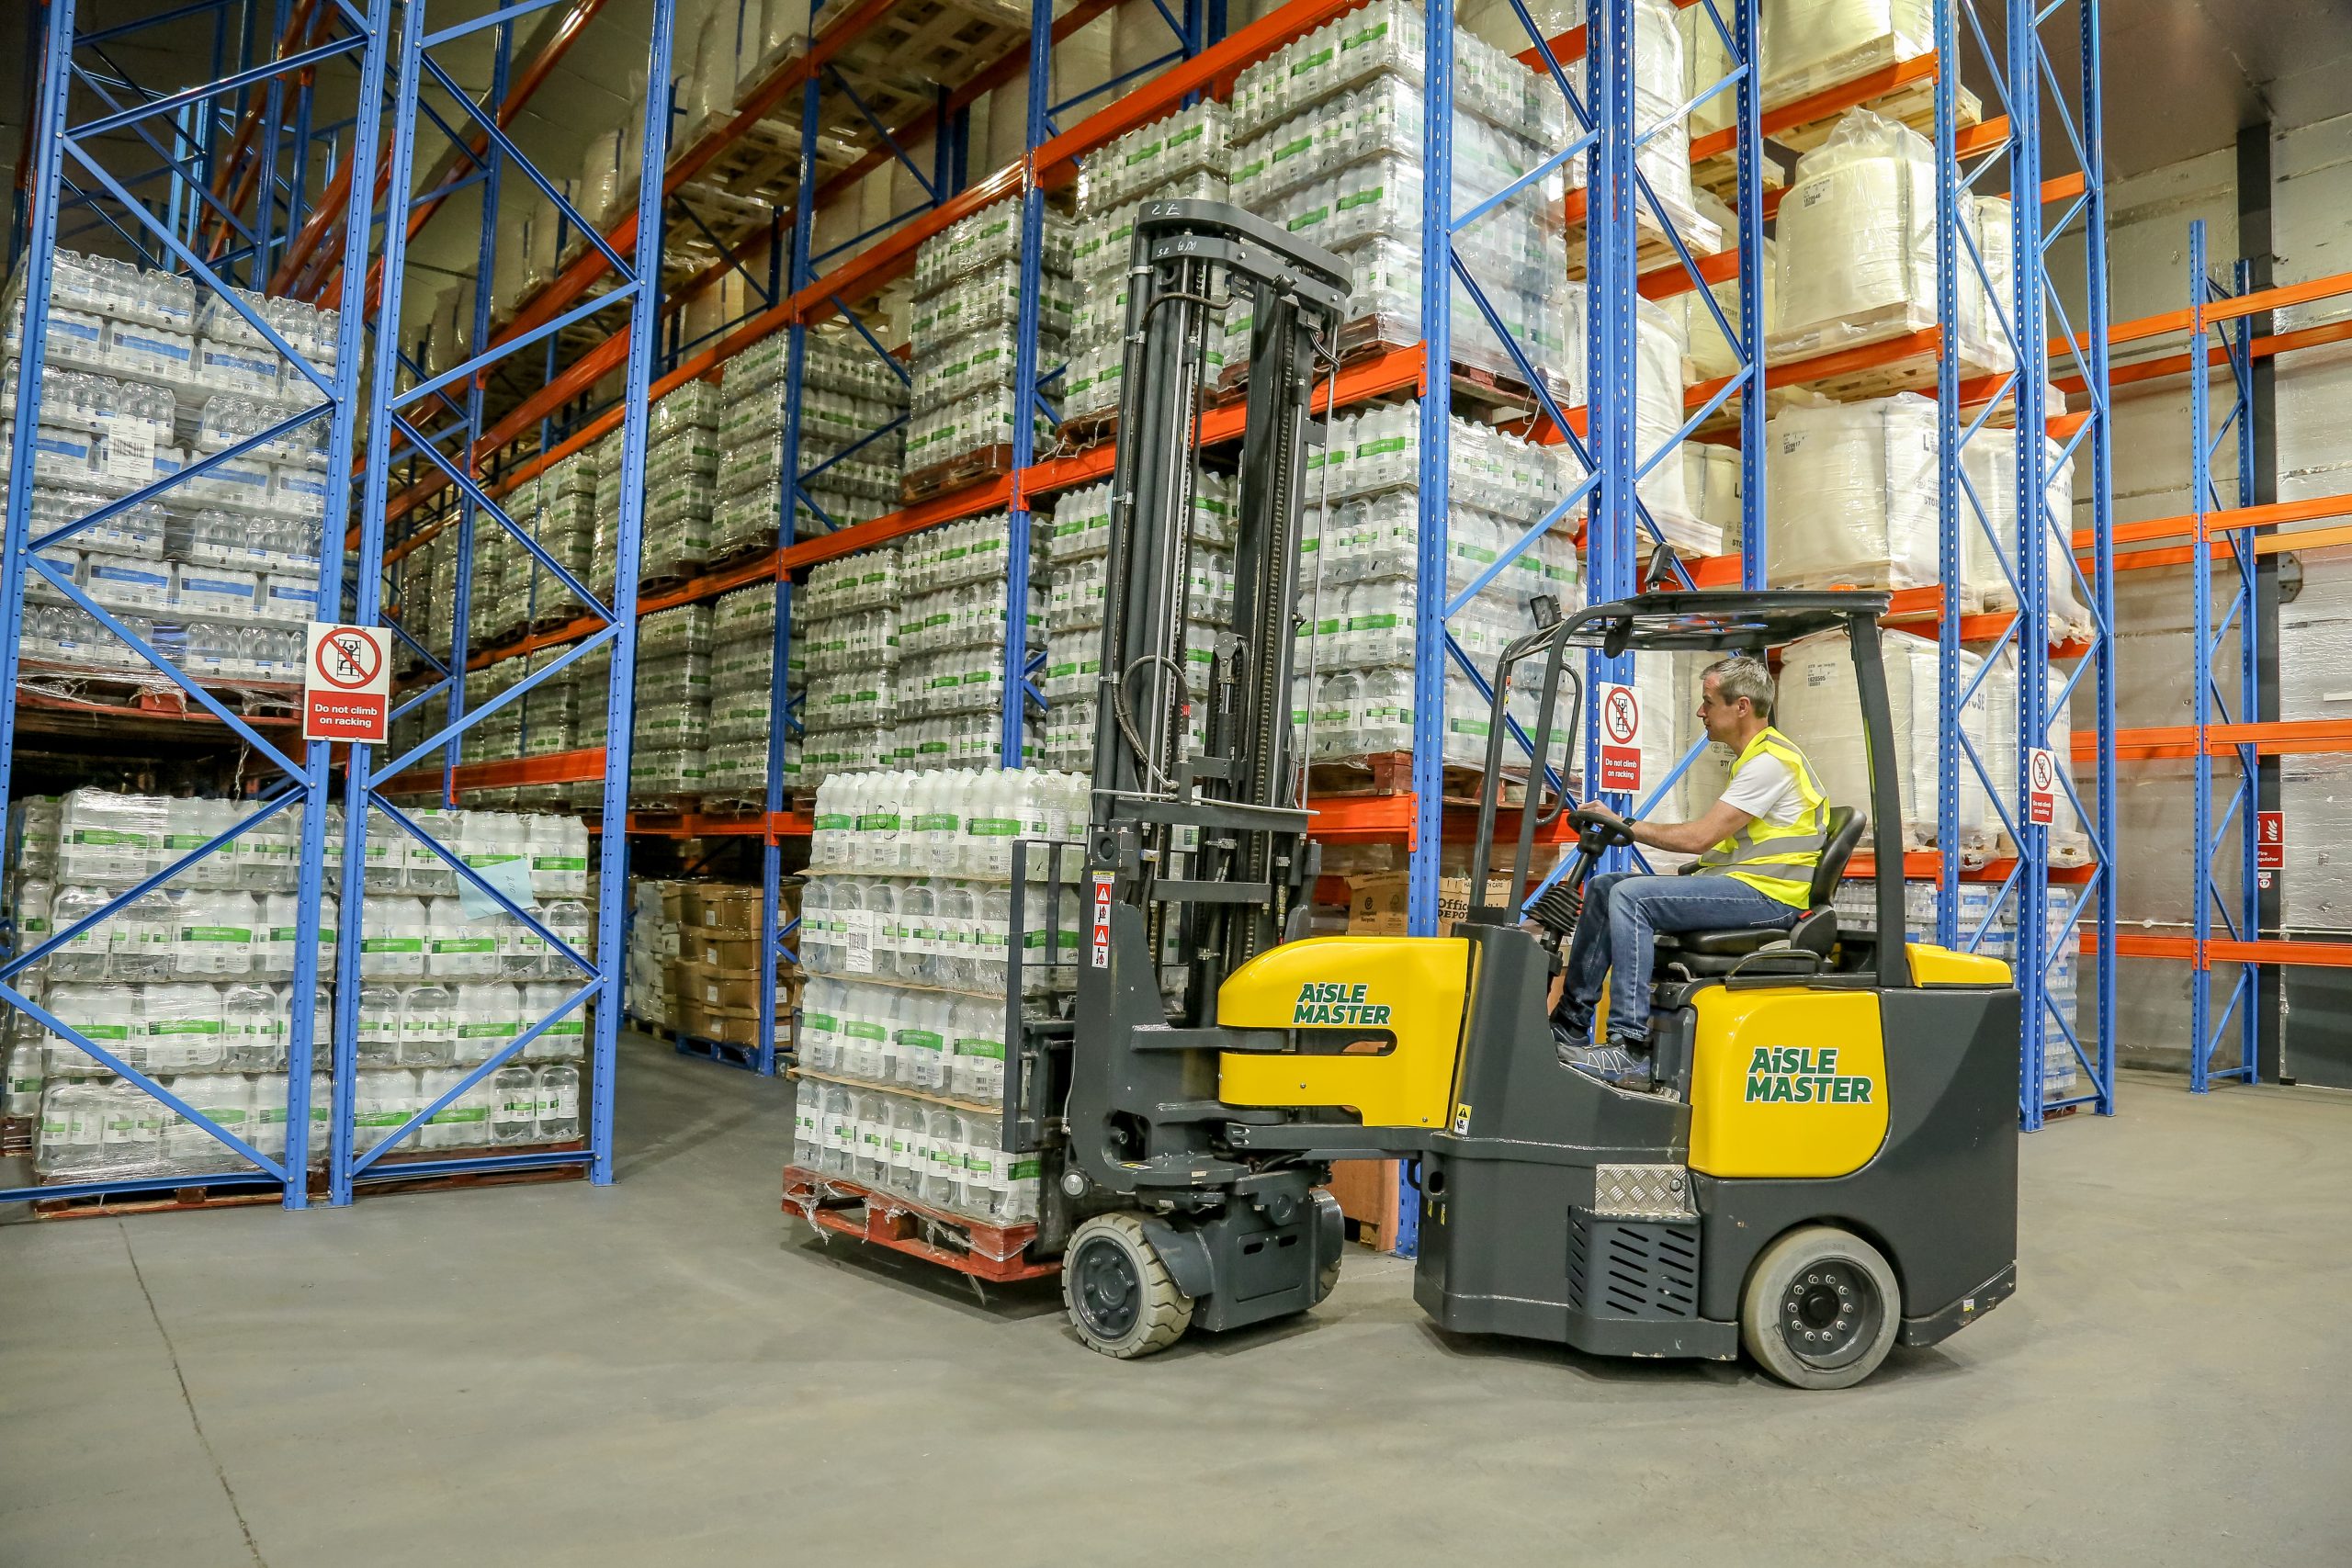 Articulated VNA Combilift Aislemaster Electric Forklift in use